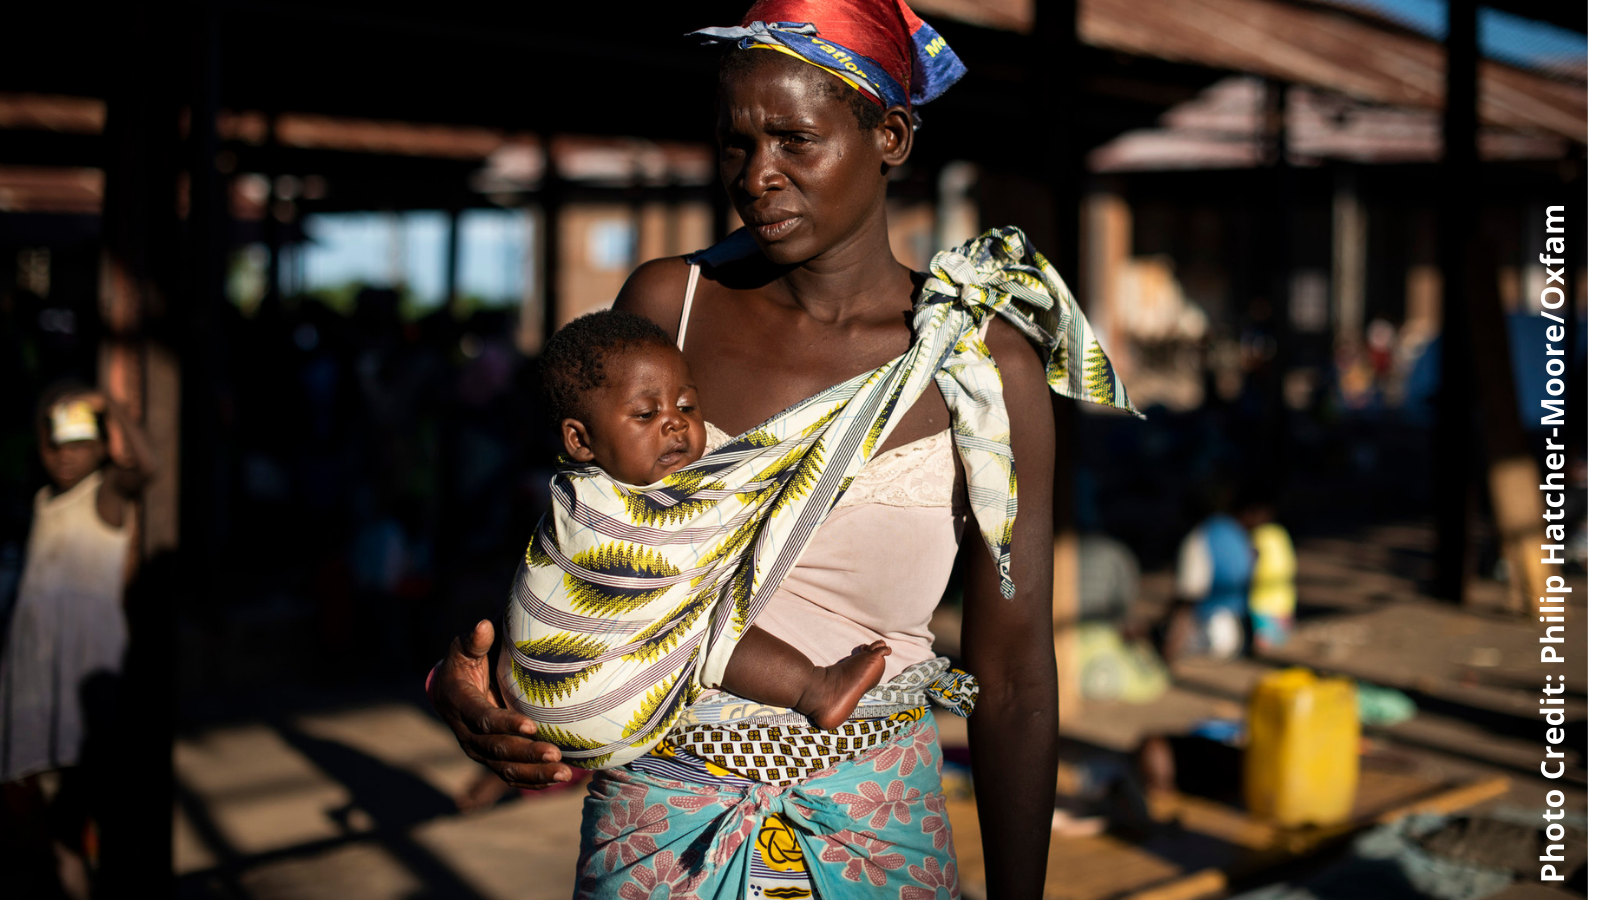 Malita, 35, stands with her four-month old son, Joseph*, in the hanger where she sleeps in the Bangula camp, southern Malawi